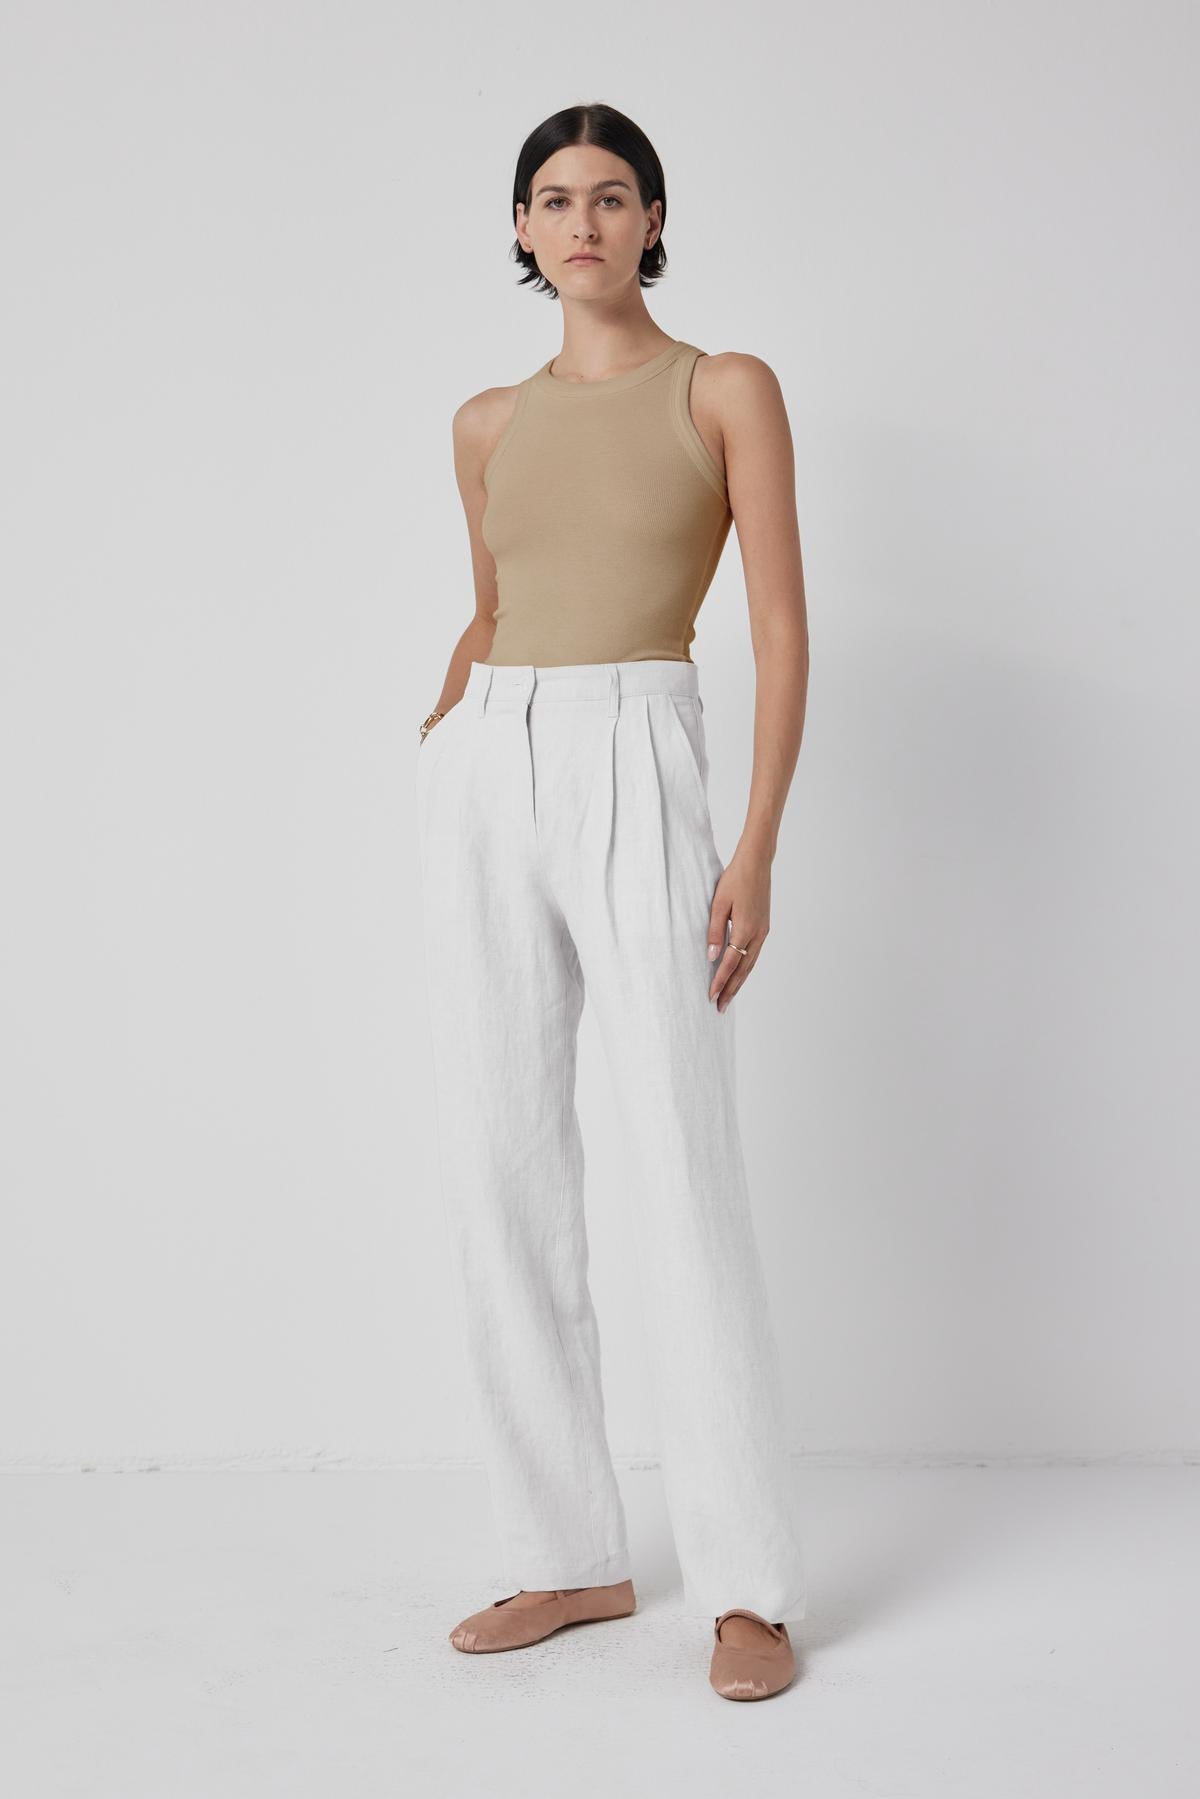   A woman standing against a white background wearing a sleeveless Cruz Tank Top, white trousers, and chic beige flat shoes by Velvet by Jenny Graham. 